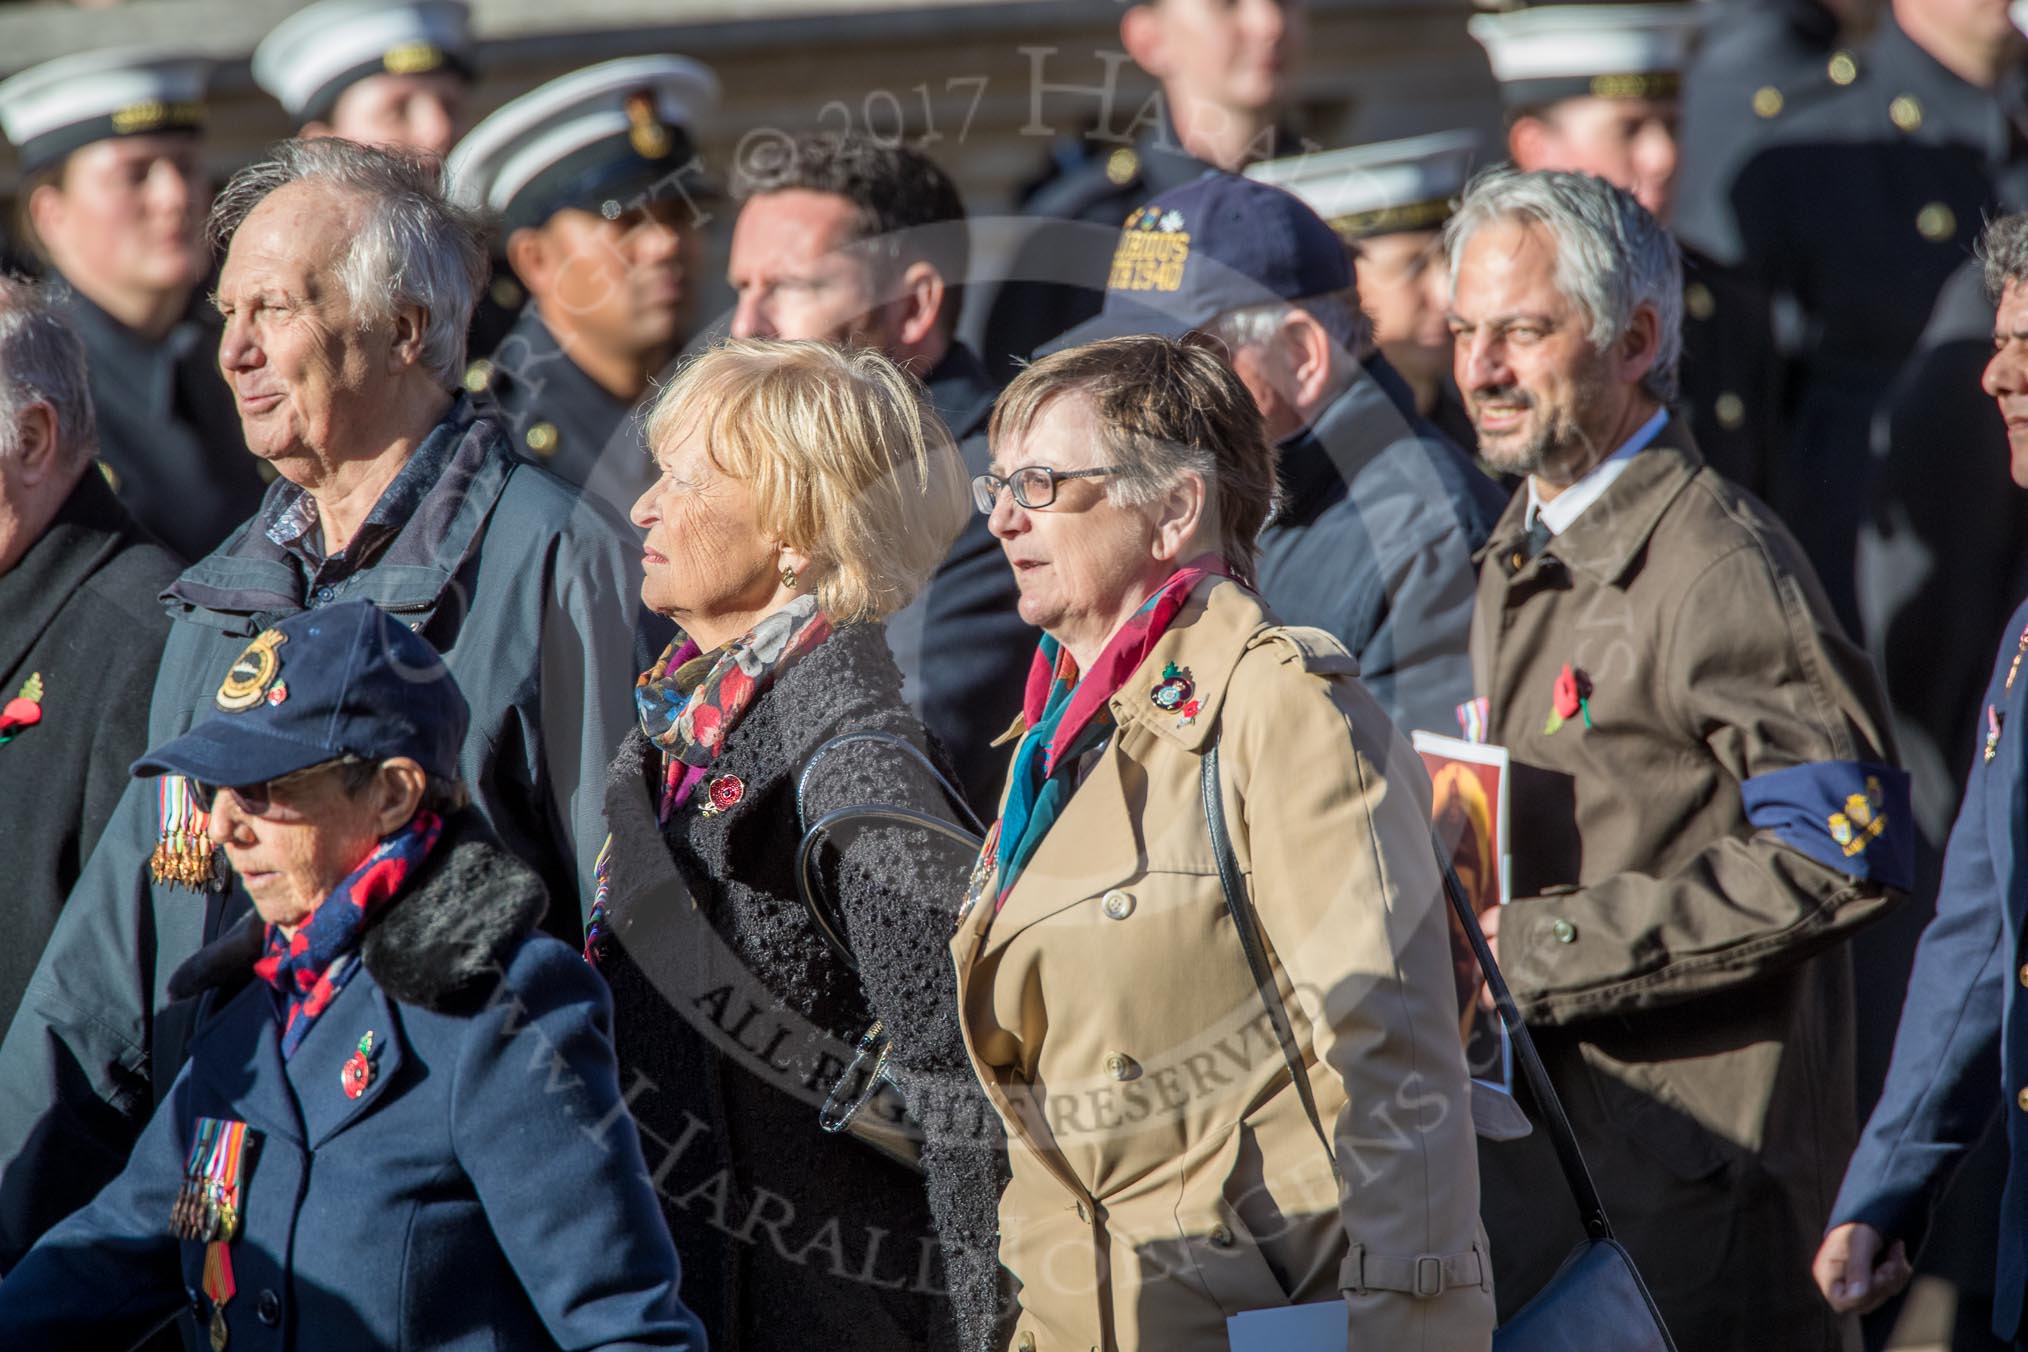 Flower Class Corvette Association  (Group E16, 18 members) during the Royal British Legion March Past on Remembrance Sunday at the Cenotaph, Whitehall, Westminster, London, 11 November 2018, 11:43.